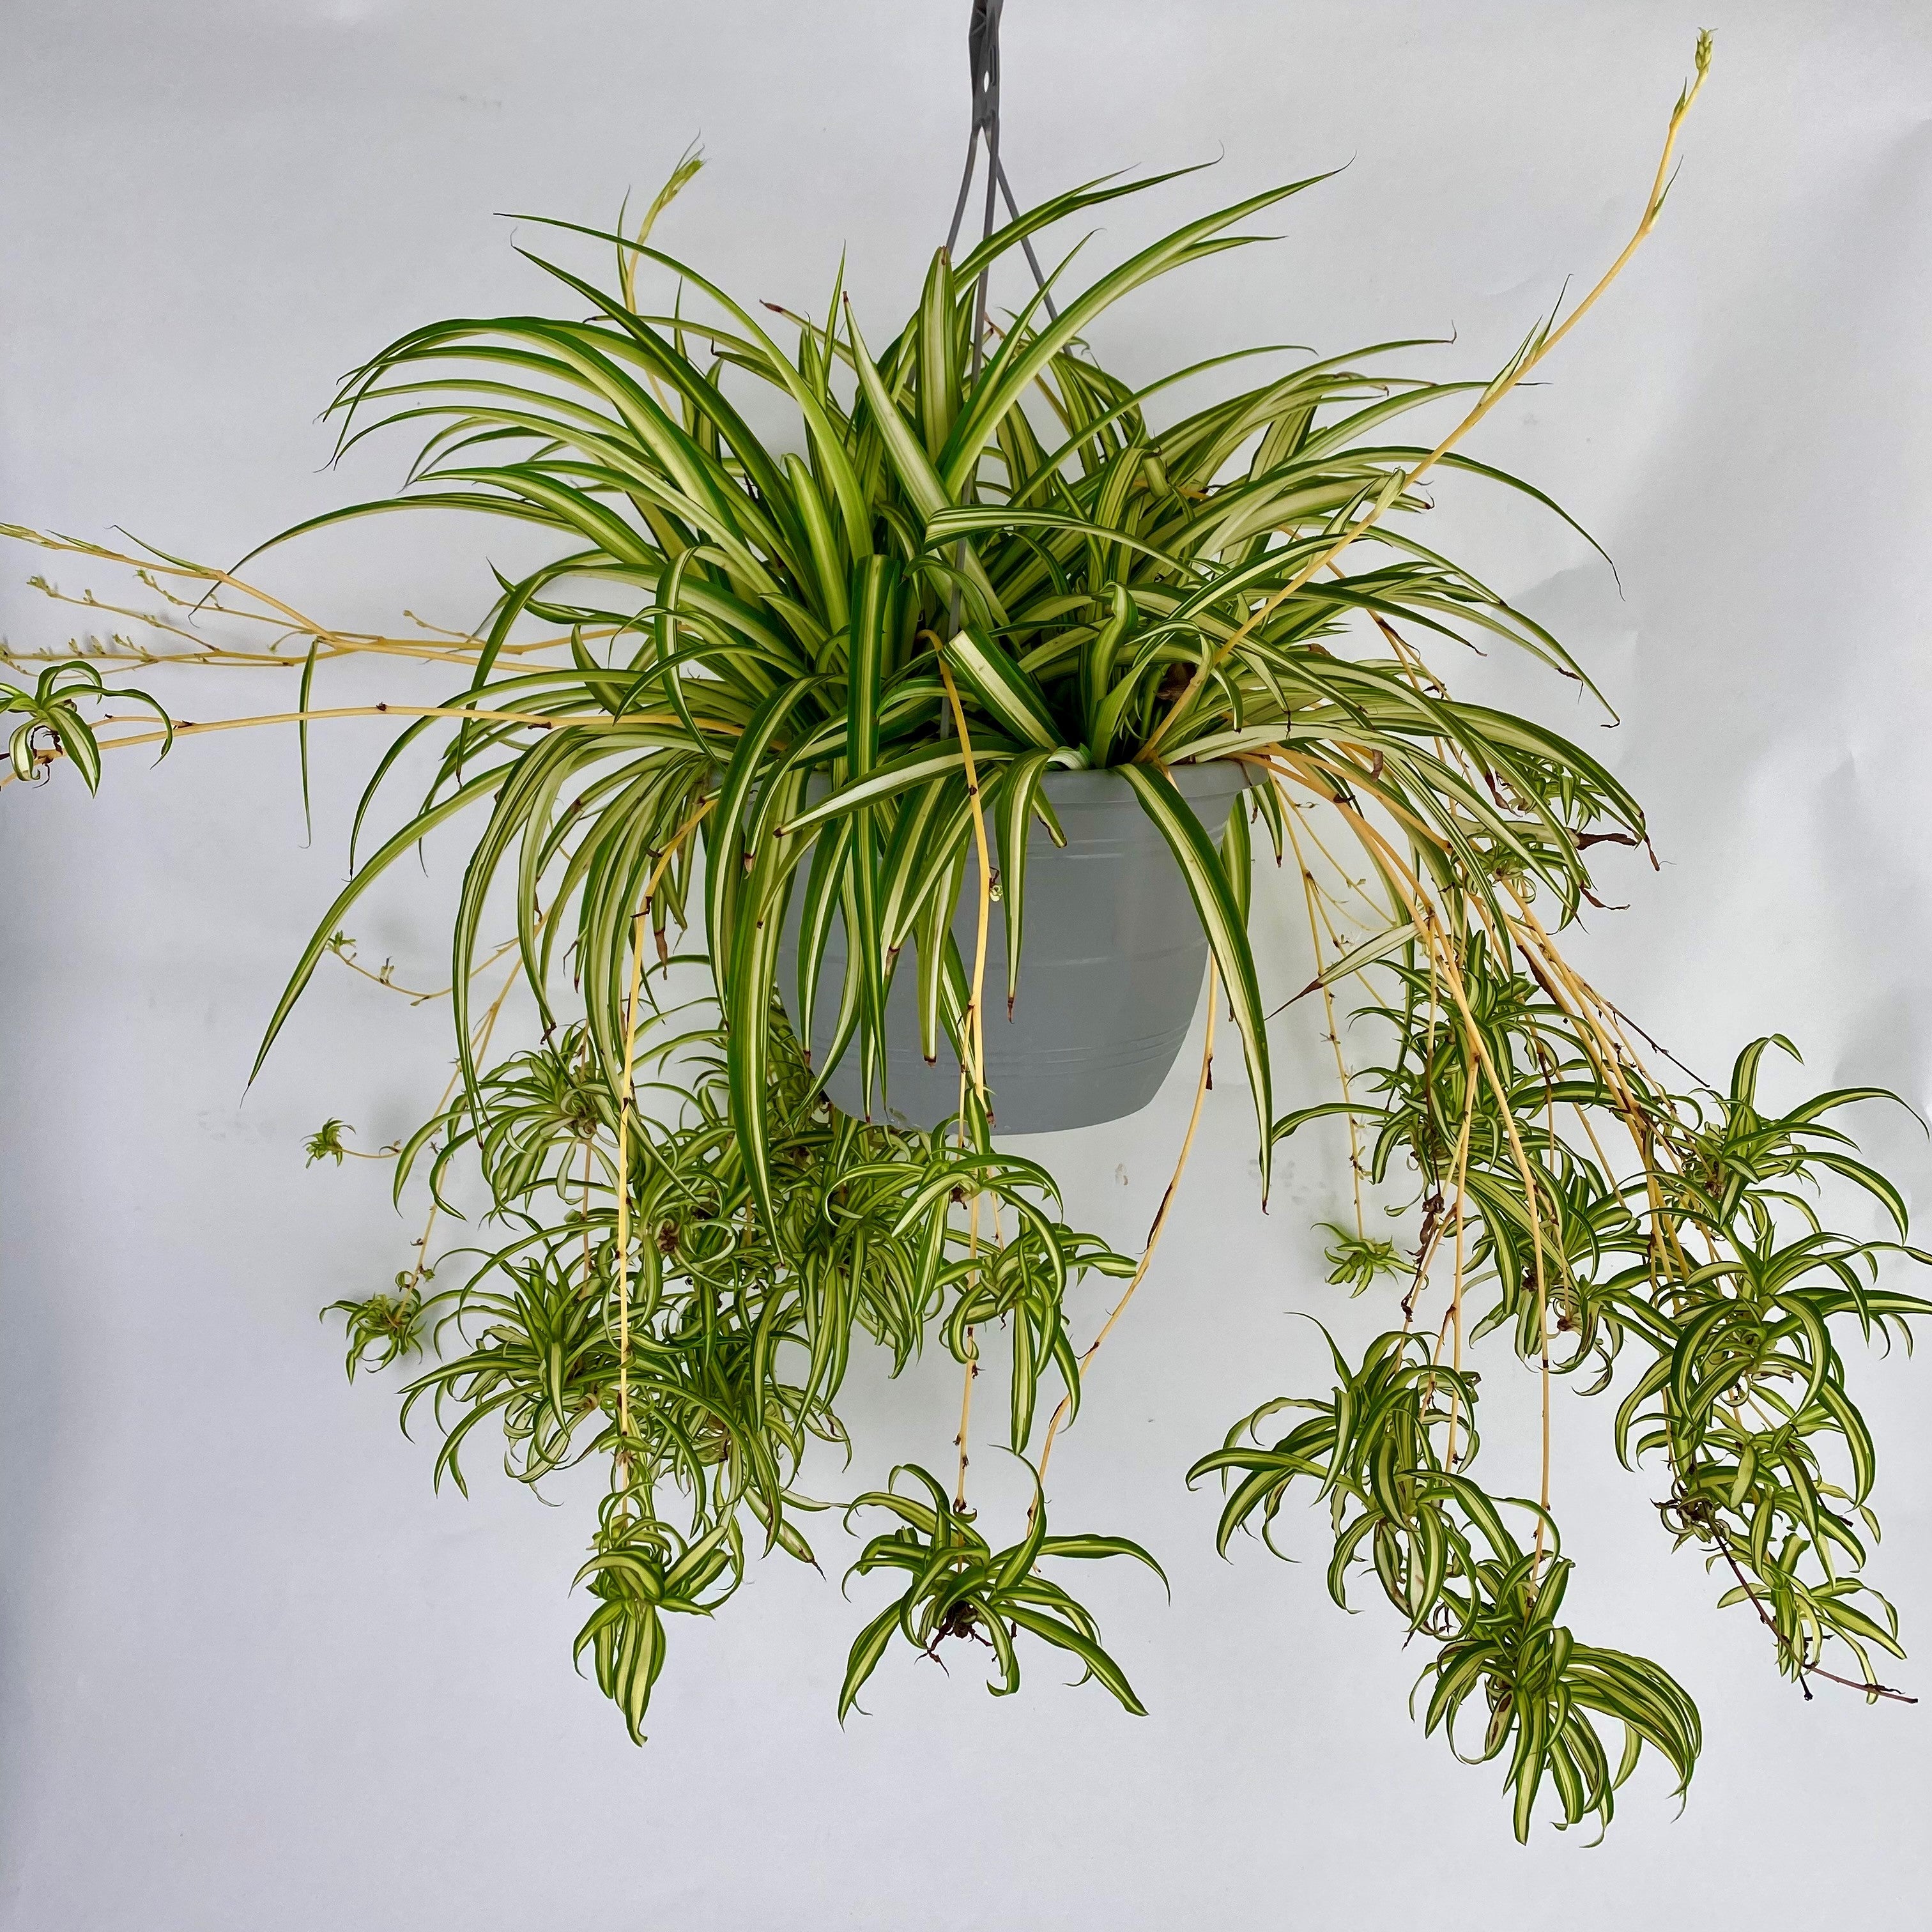 Can Spider plants grow outdoors?